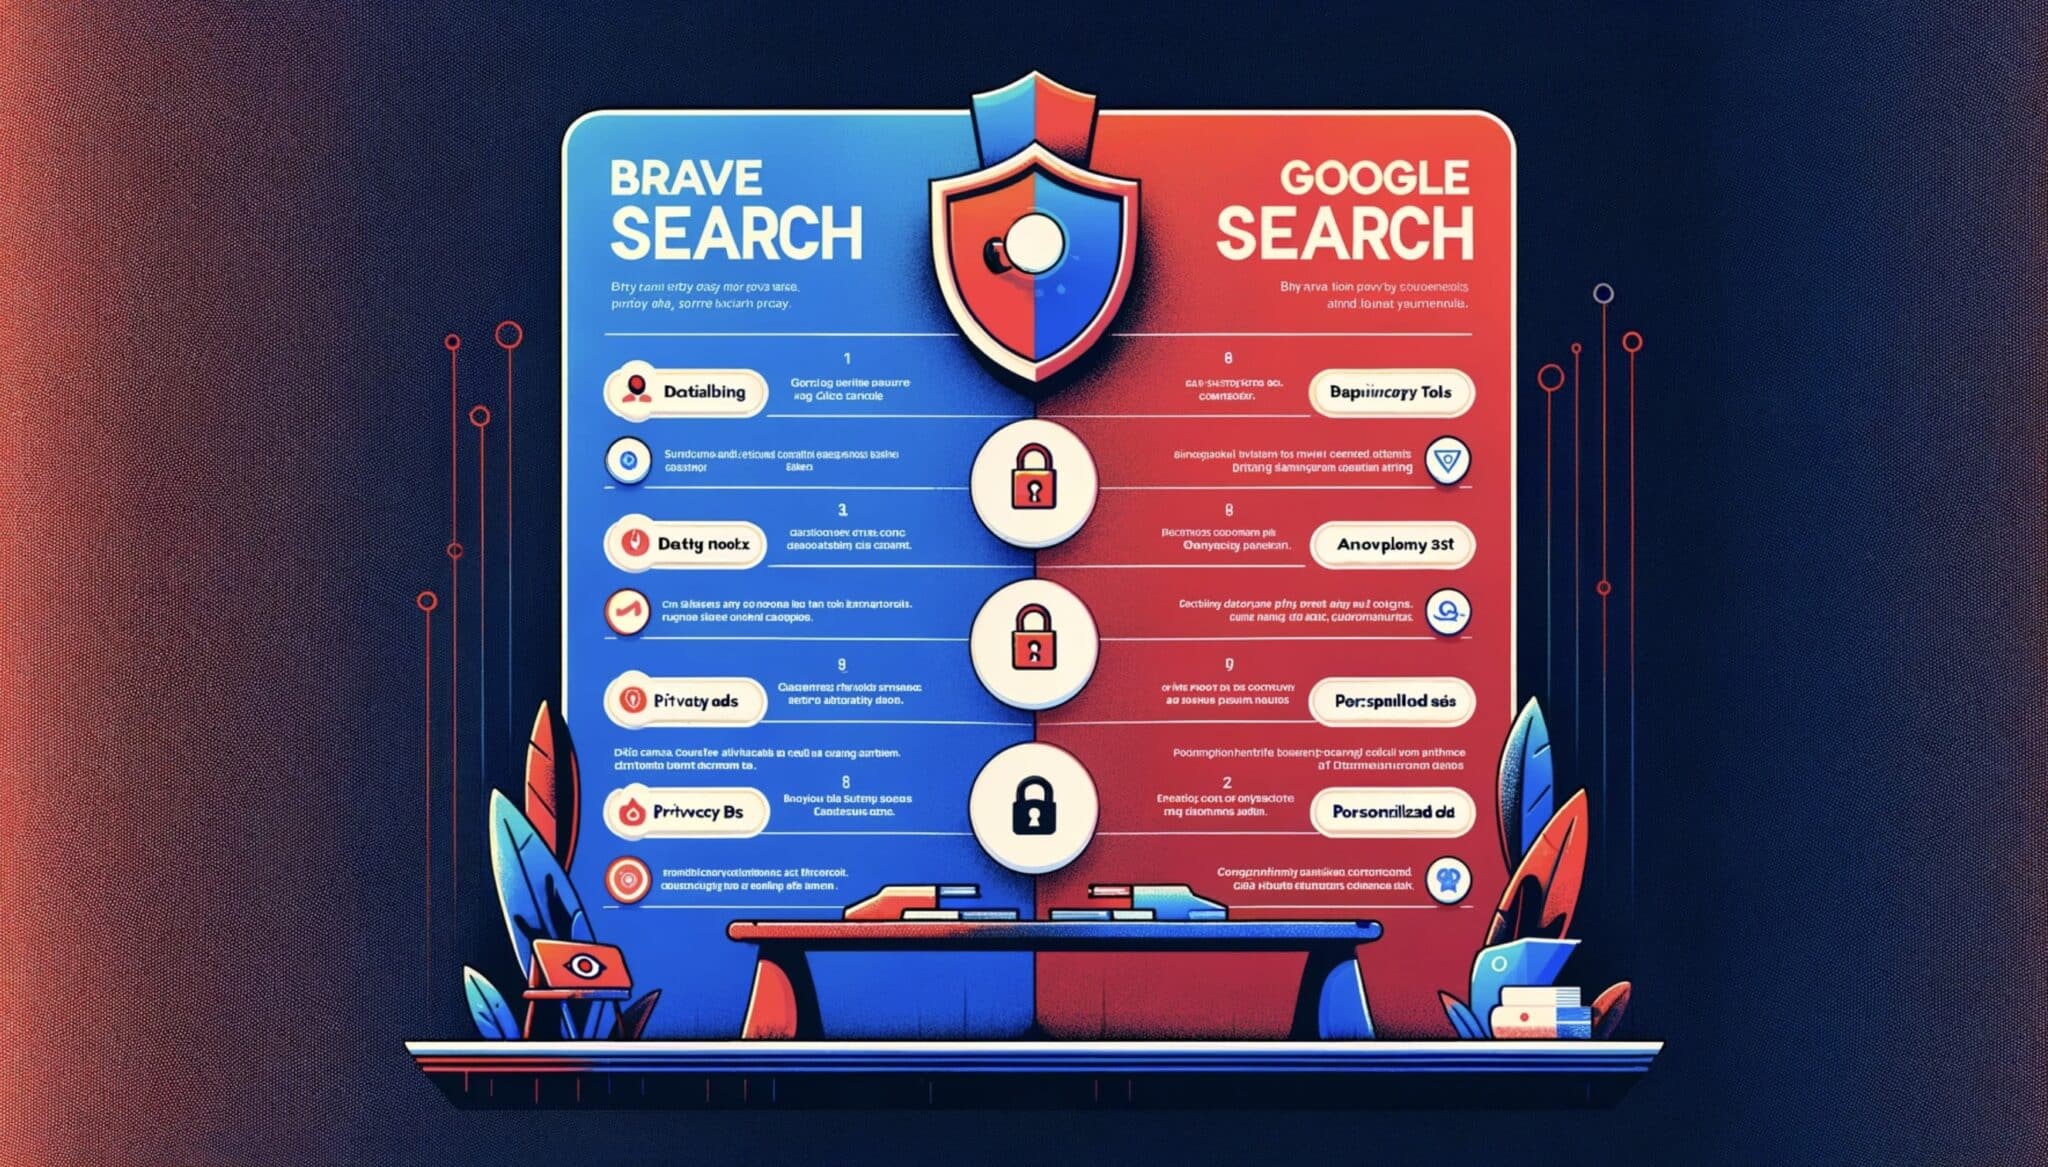 How Does Brave Search Compare to Google in Protecting Personal Data?